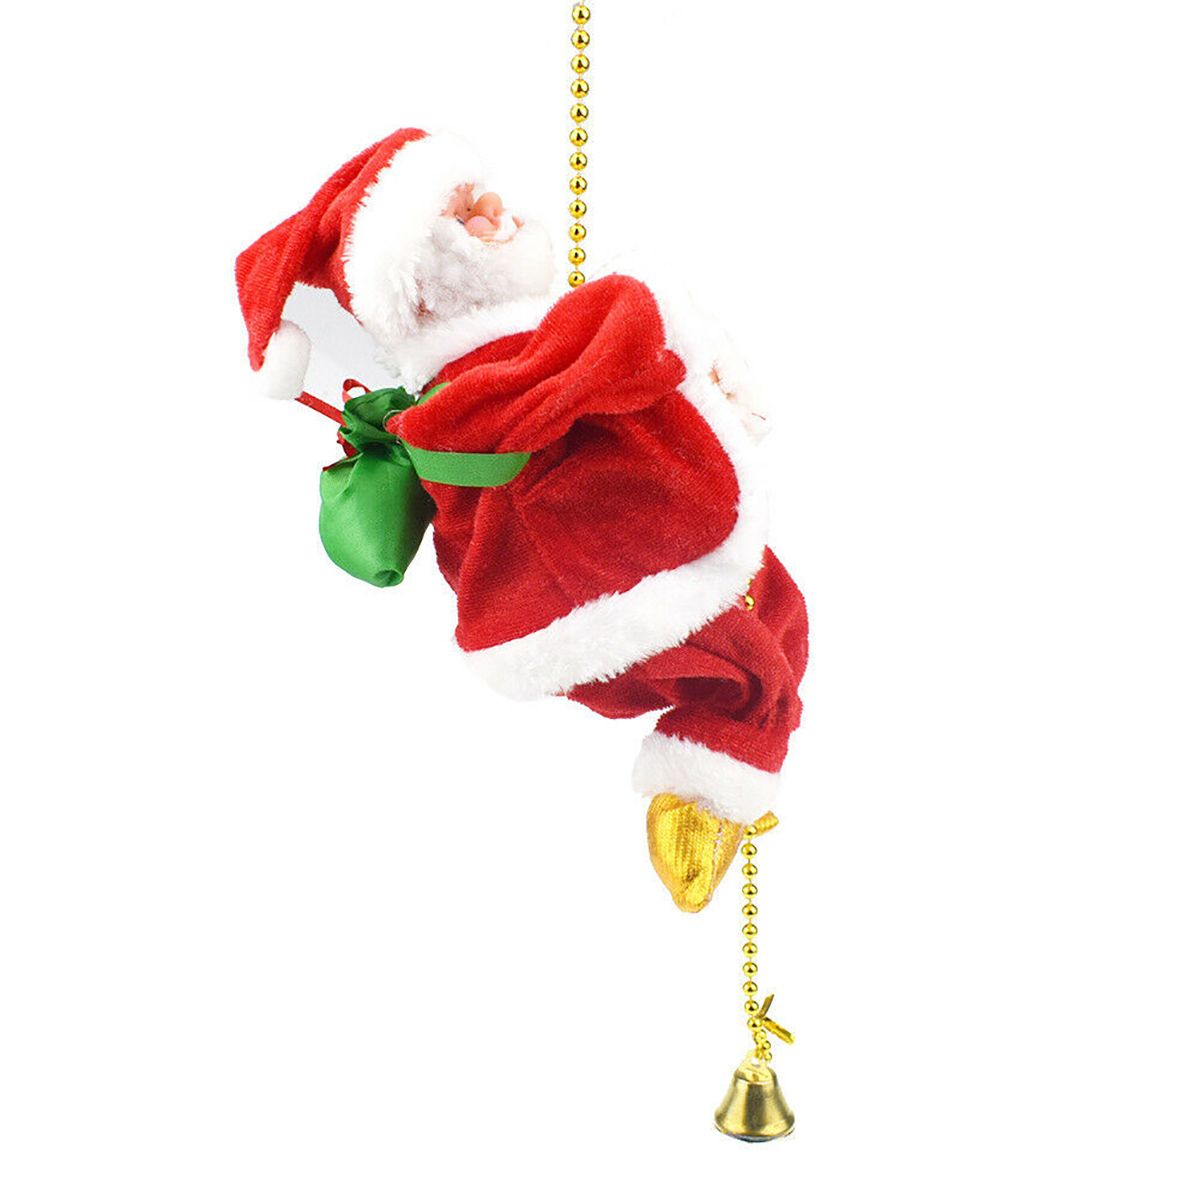 Electric-Santa-Climbing-On-Rope-IndoorOutdoor-Christmas-Gift-Decorations-1746828